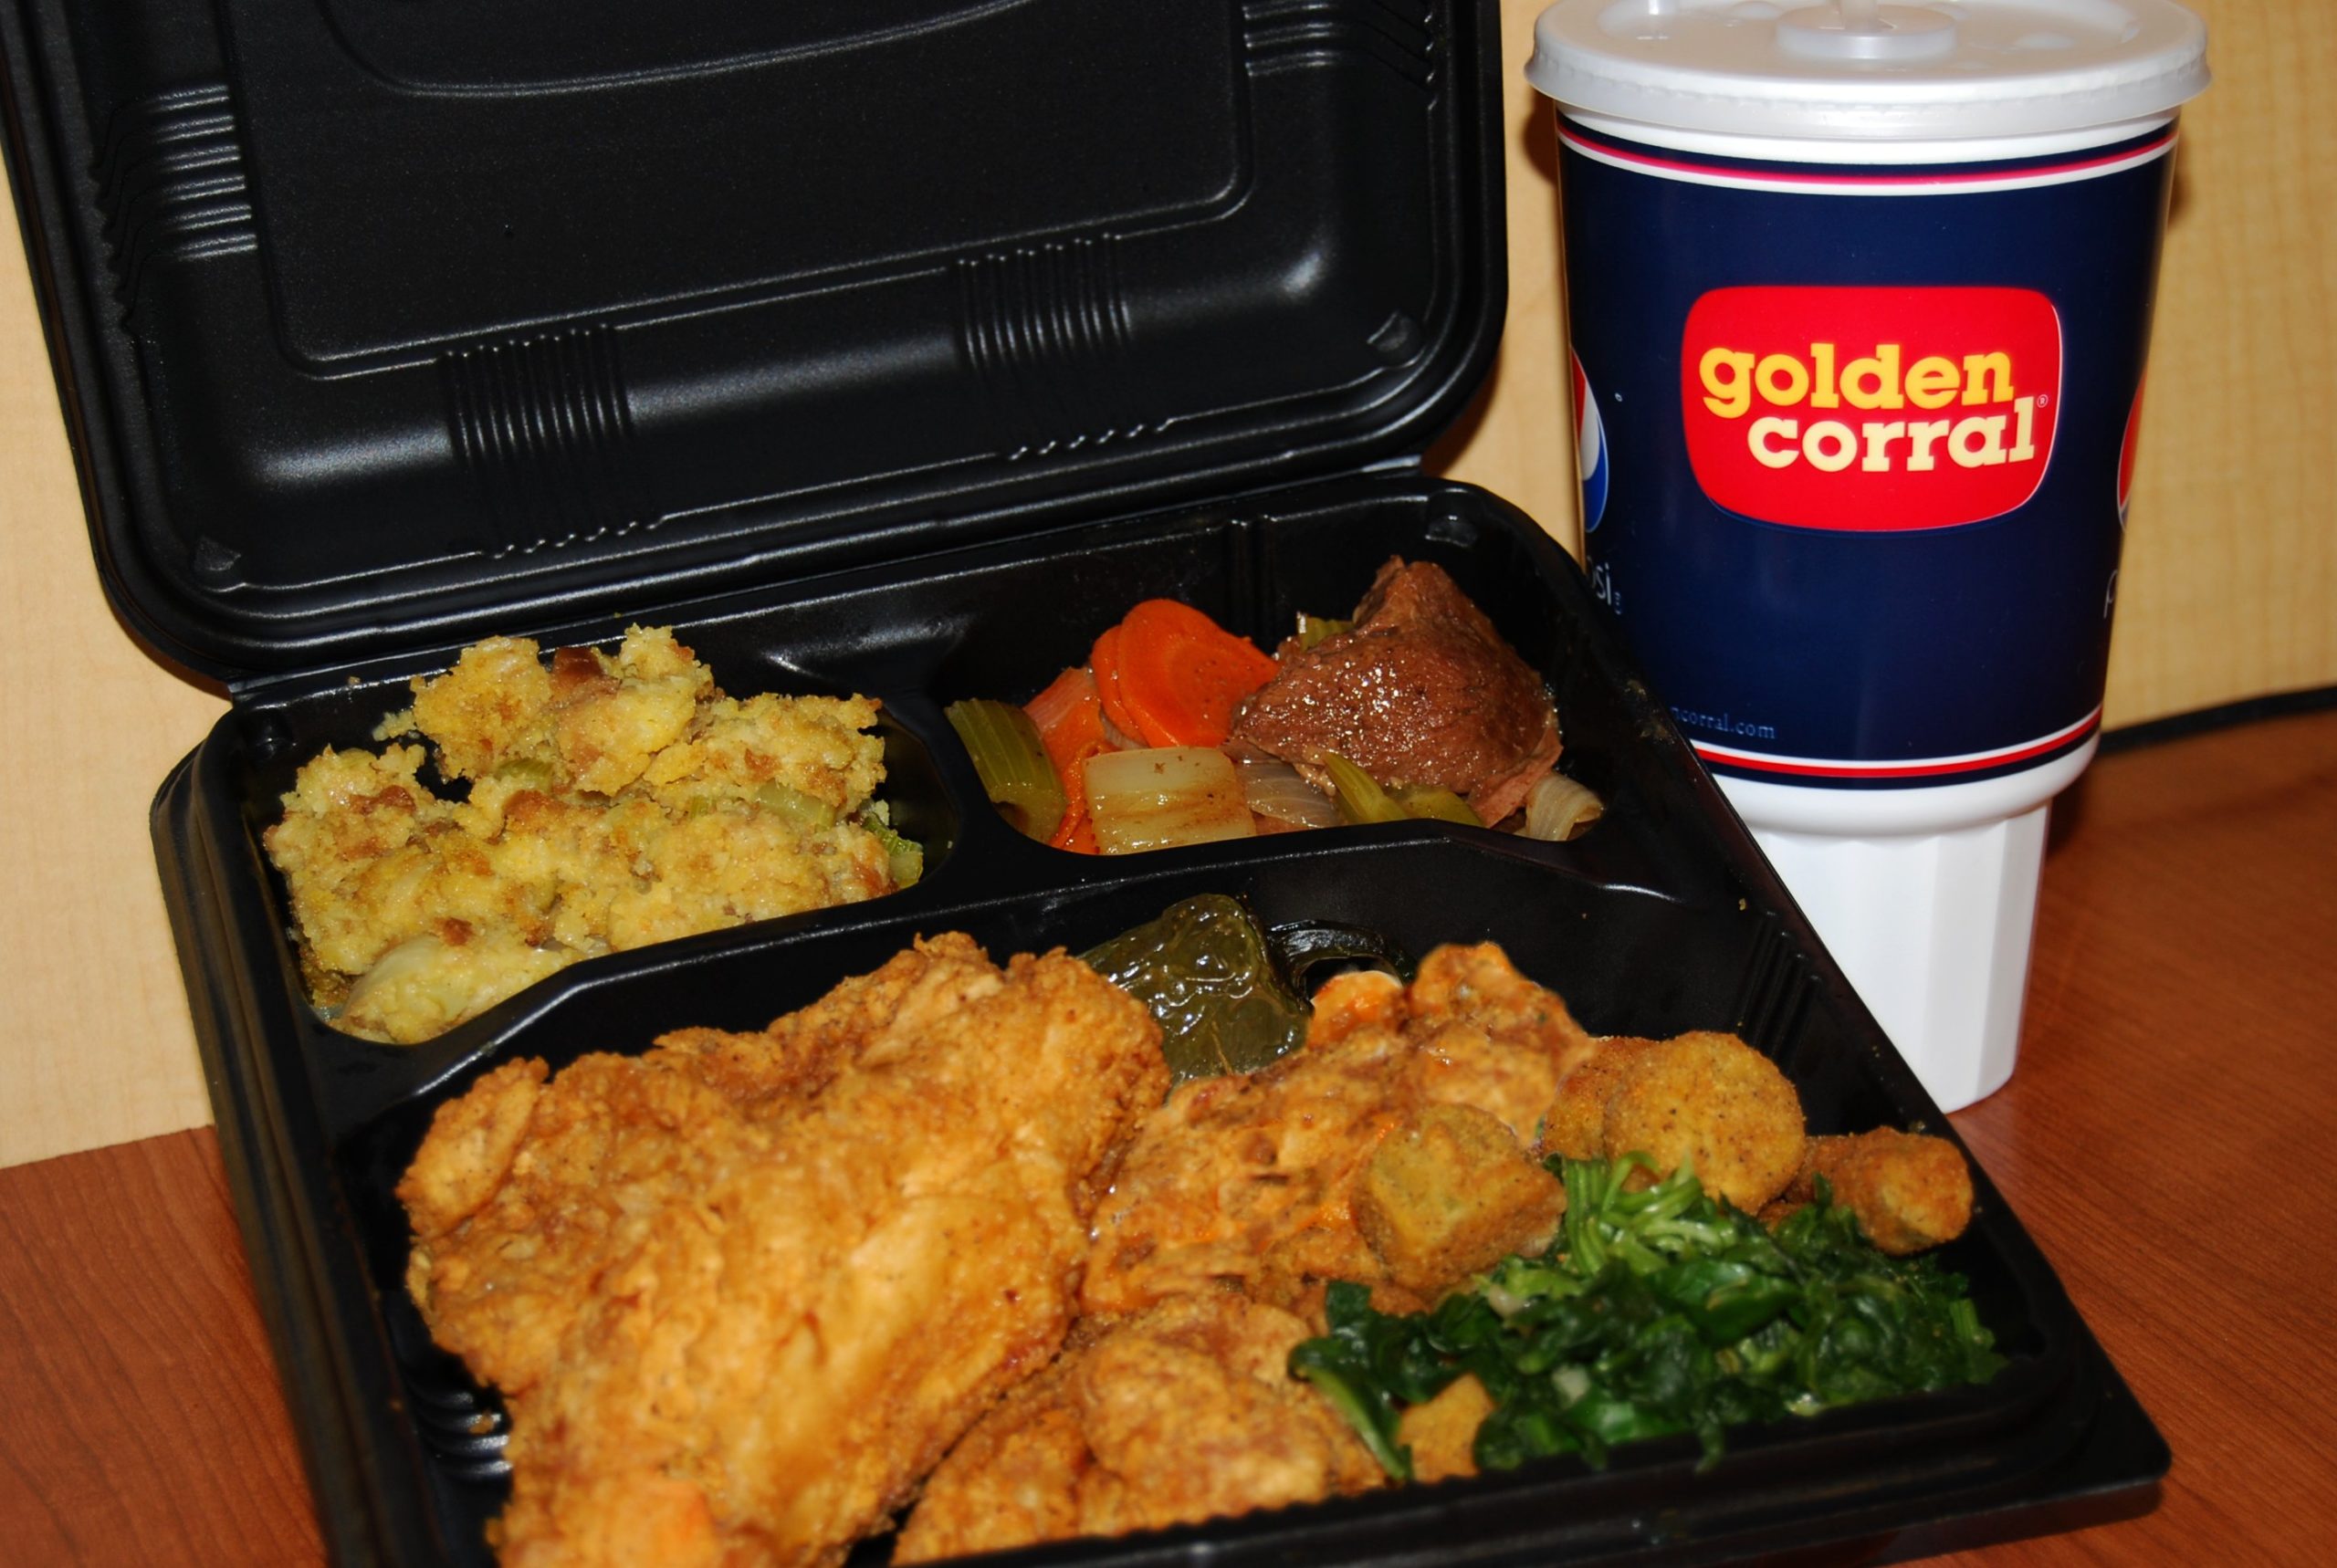 Can you take food to go at Golden Corral? - Foodly